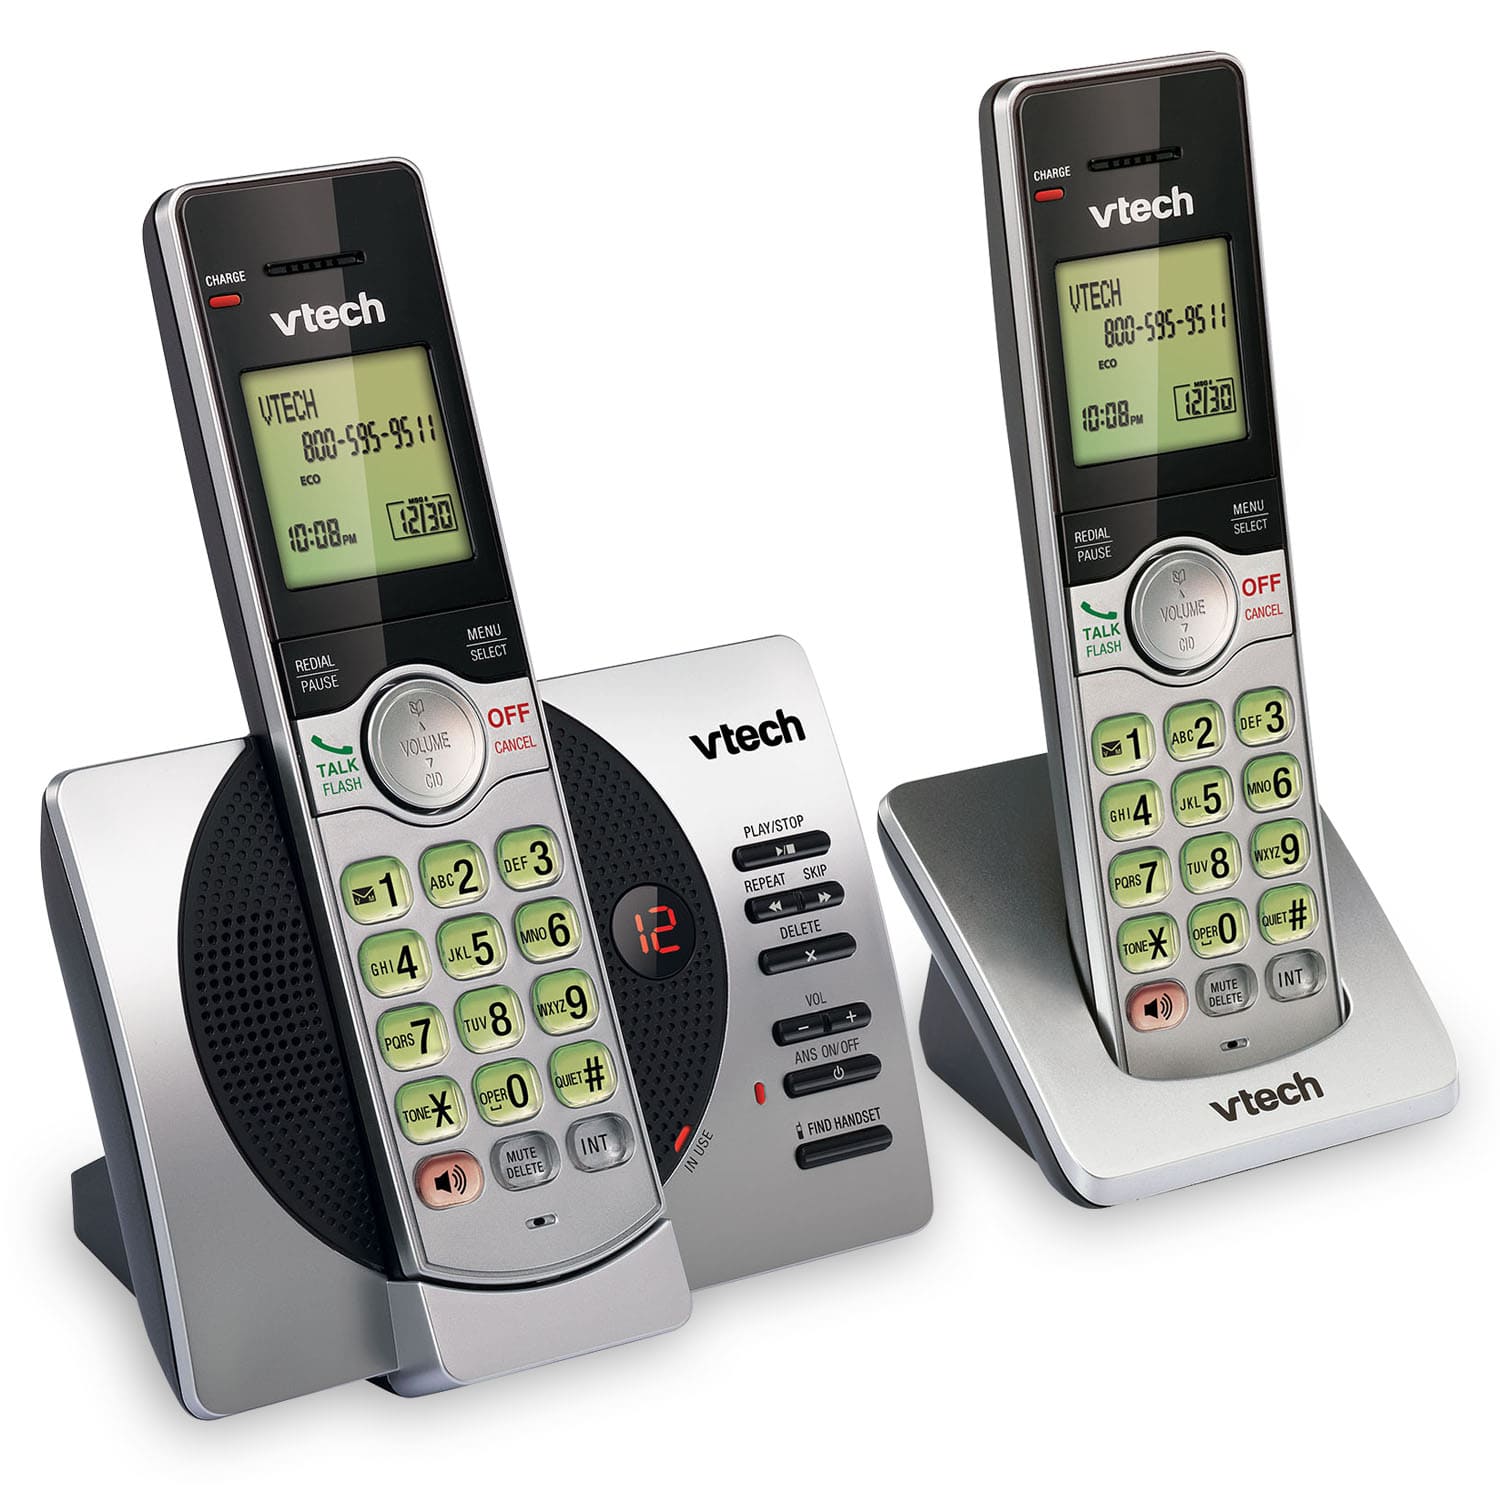 VTech DS6621-2 Cordless Phone Answering Machine Base ONLY NEW:Openbox 